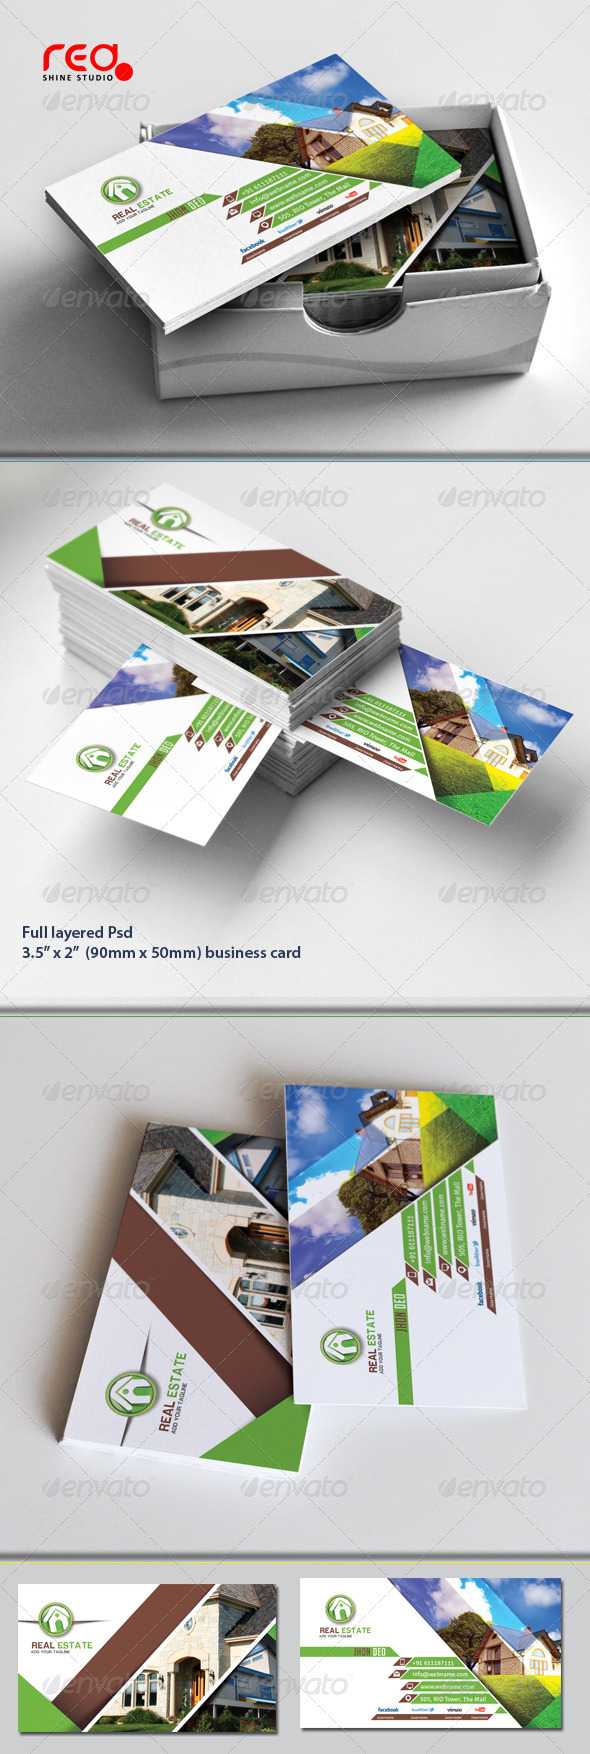 Real Estate Business Cards Graphics, Designs & Templates Pertaining To Real Estate Business Cards Templates Free